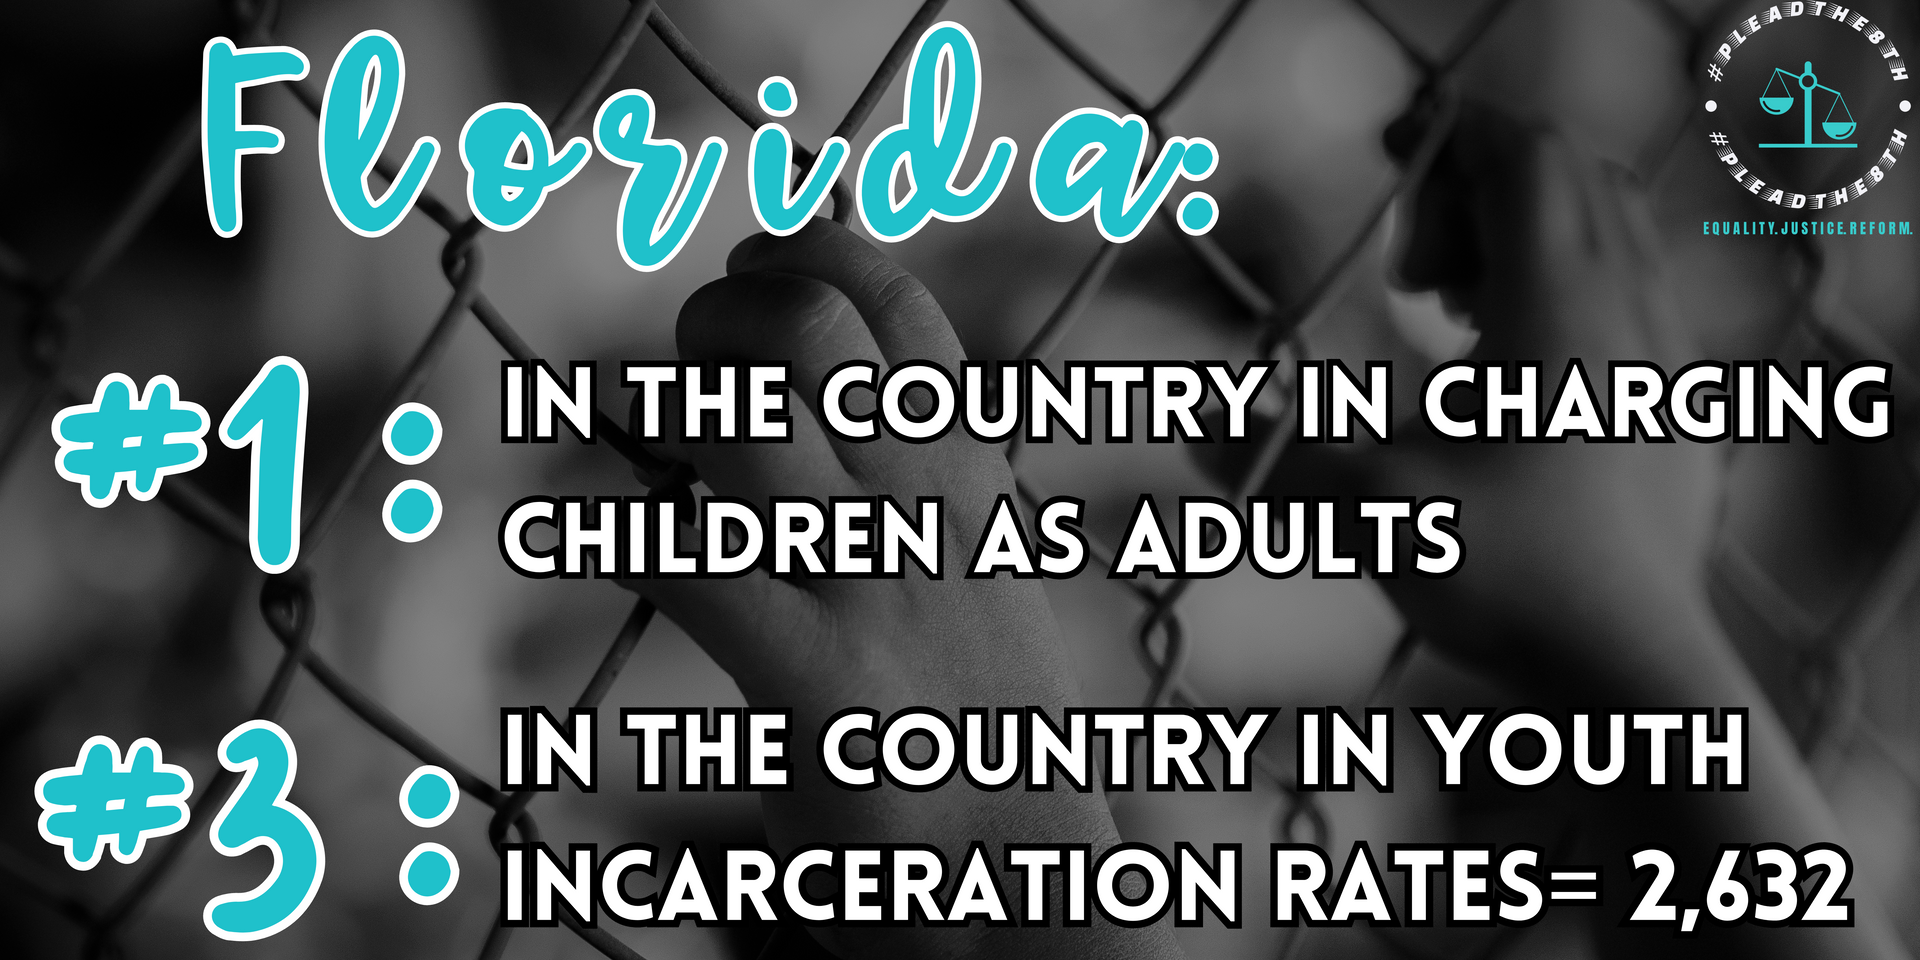 Florida: #1 in charging children as adults. #3 in youth incarceration rates.